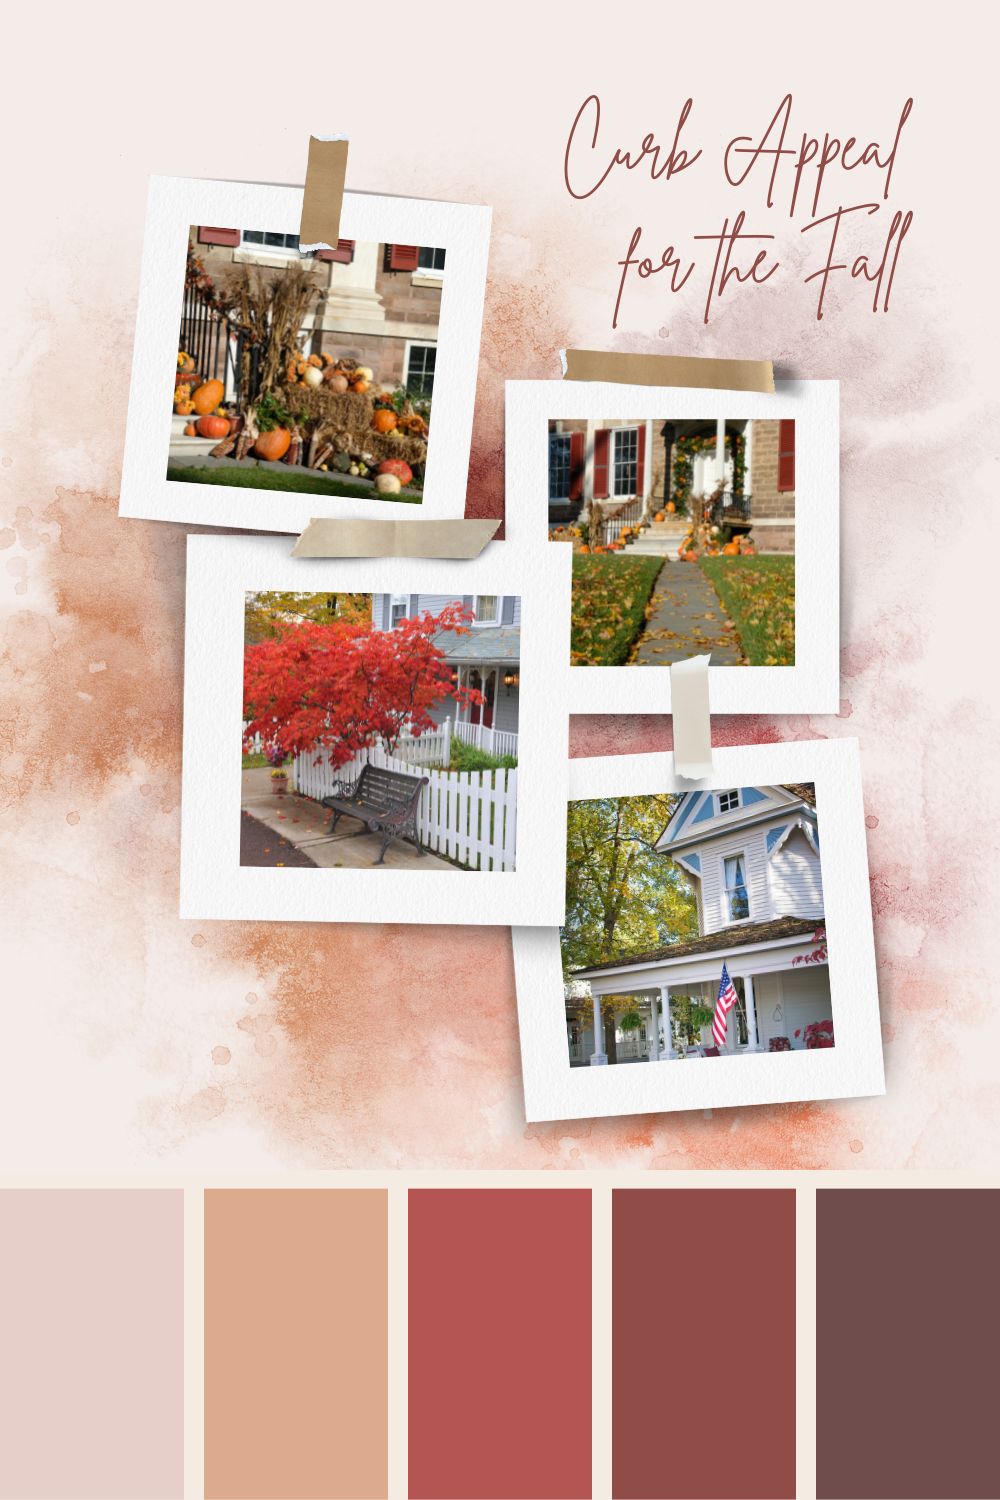 Curb Appeal for the Fall